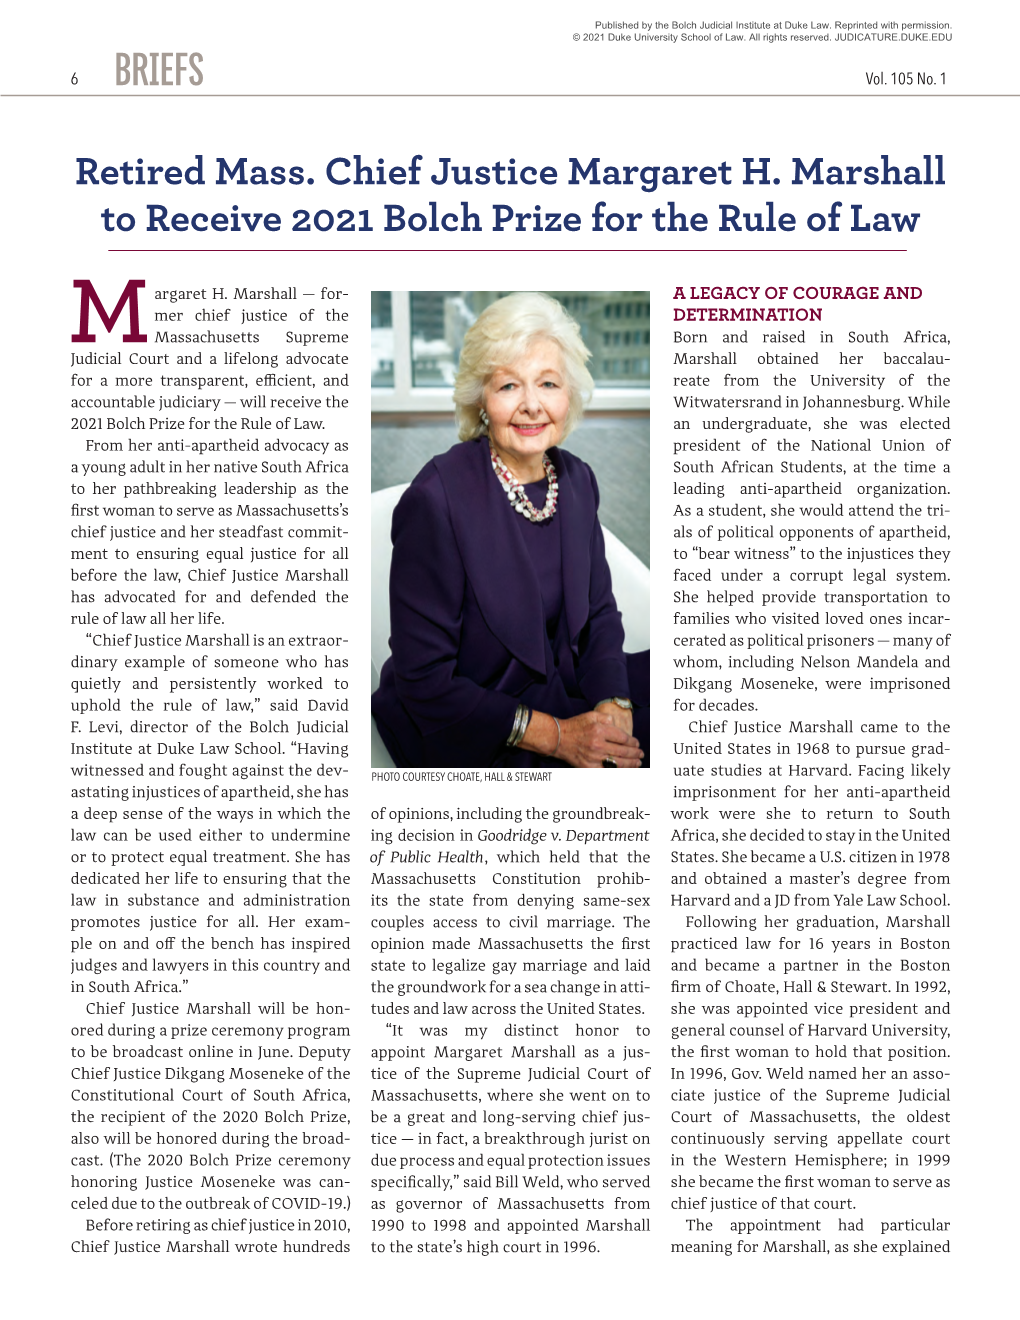 Retired Mass. Chief Justice Margaret H. Marshall to Receive 2021 Bolch Prize for the Rule of Law